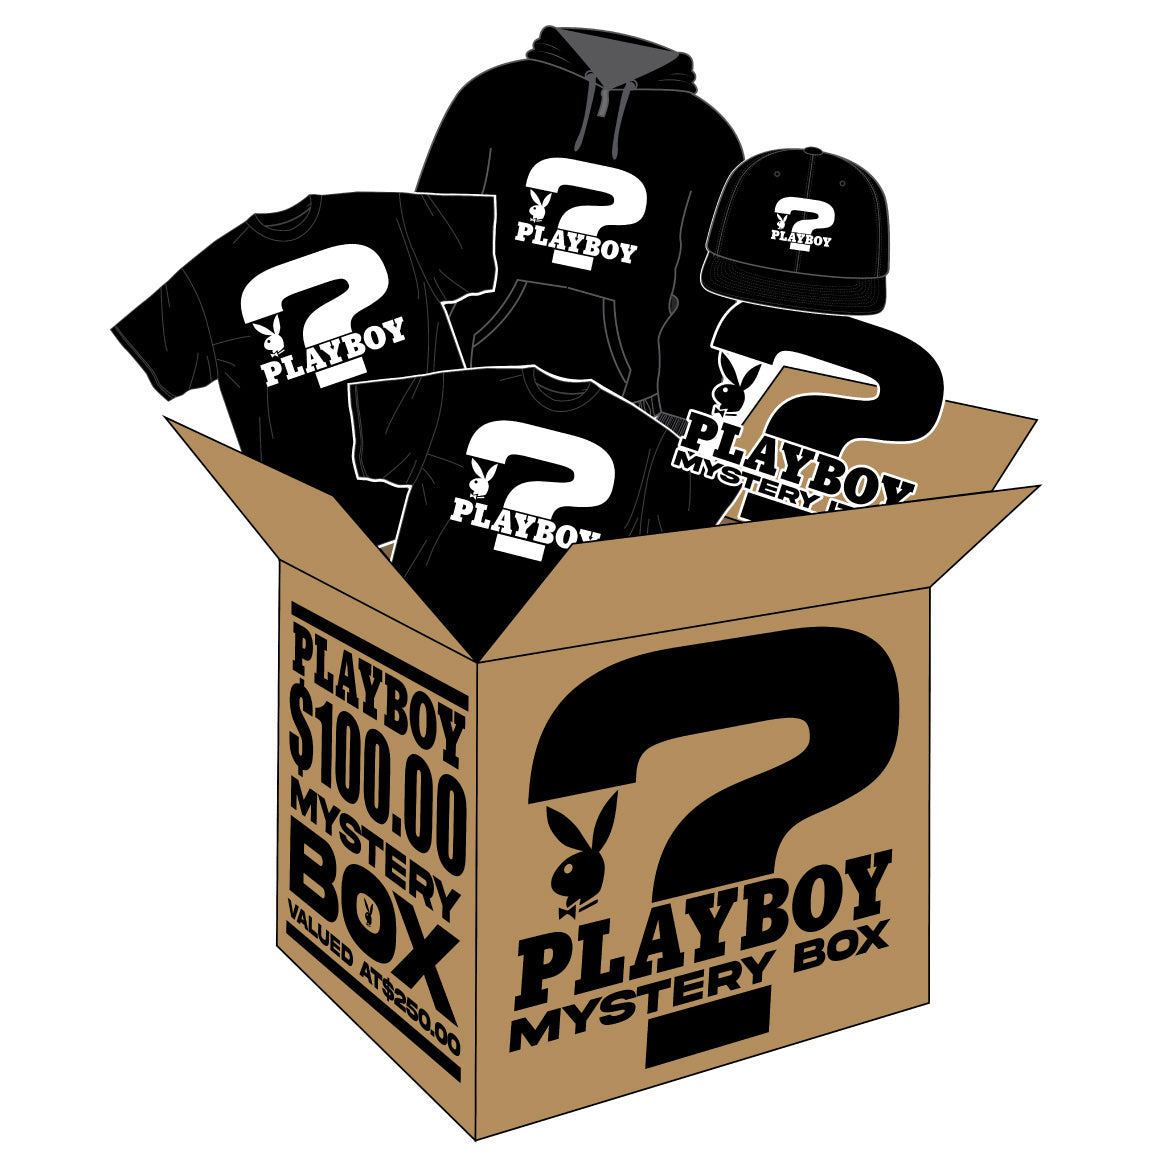 Mystery Box (Limited Edition)- $100 Value –